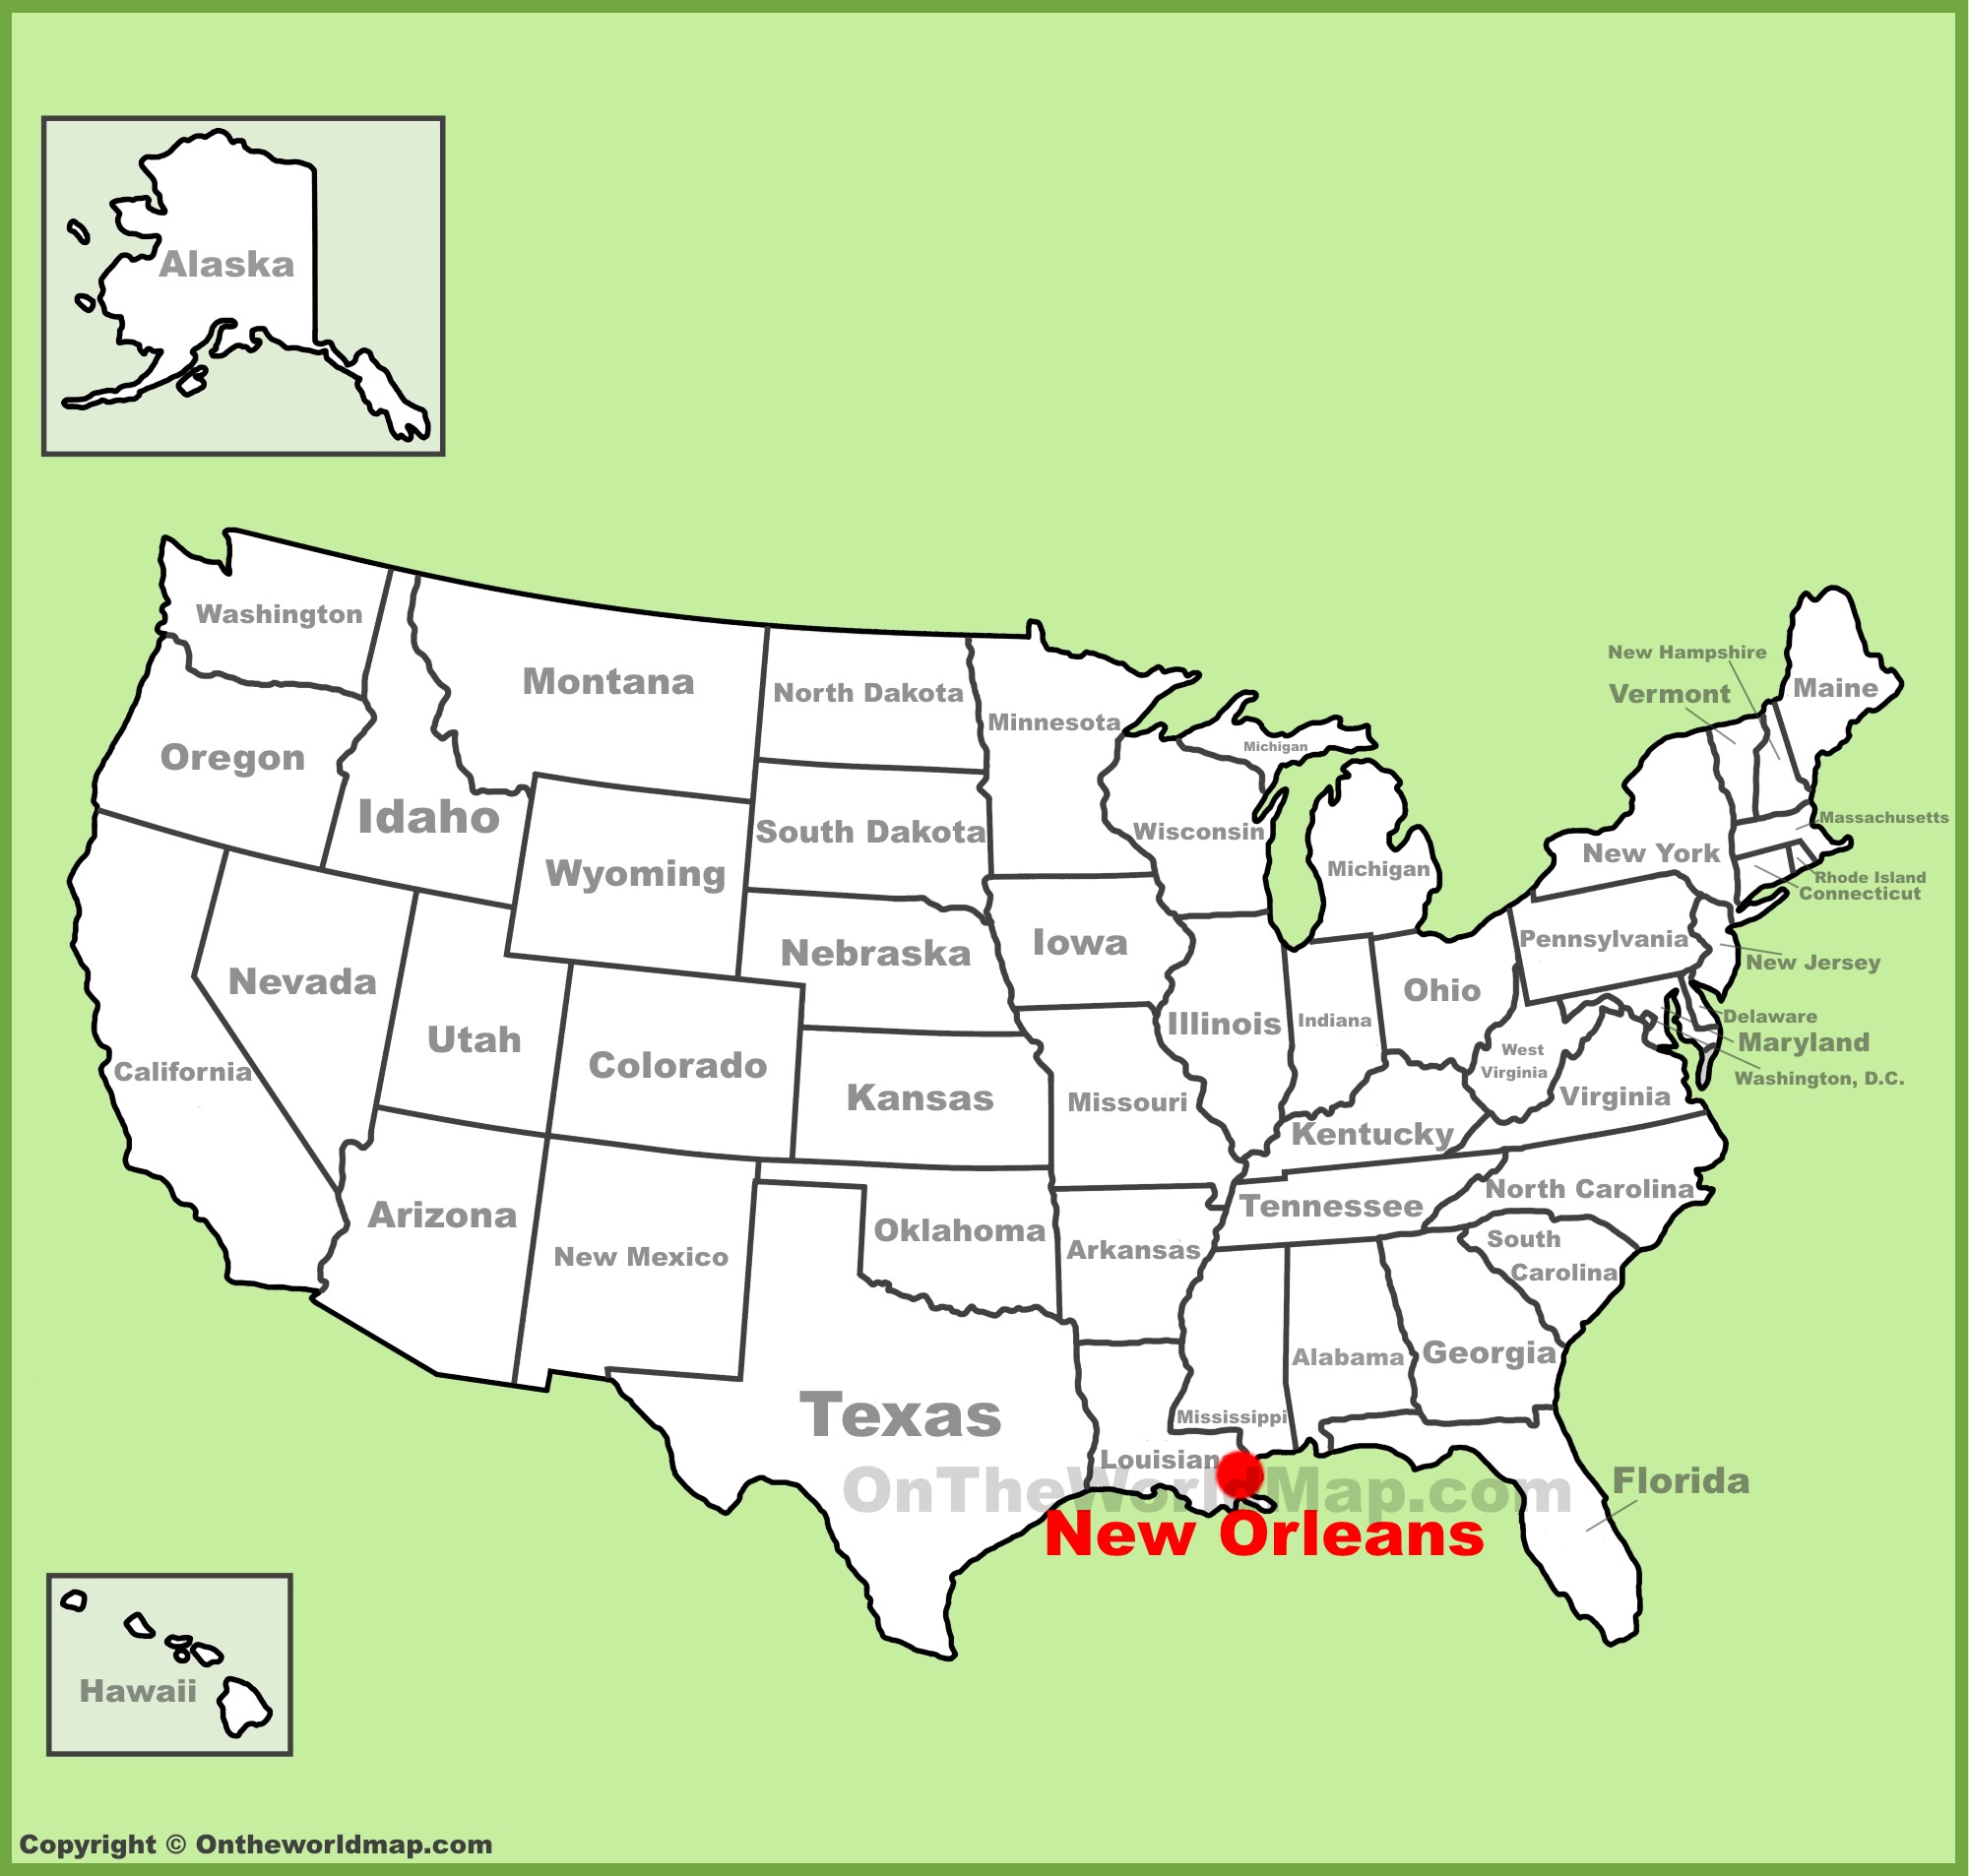 New Orleans Location On The U S Map